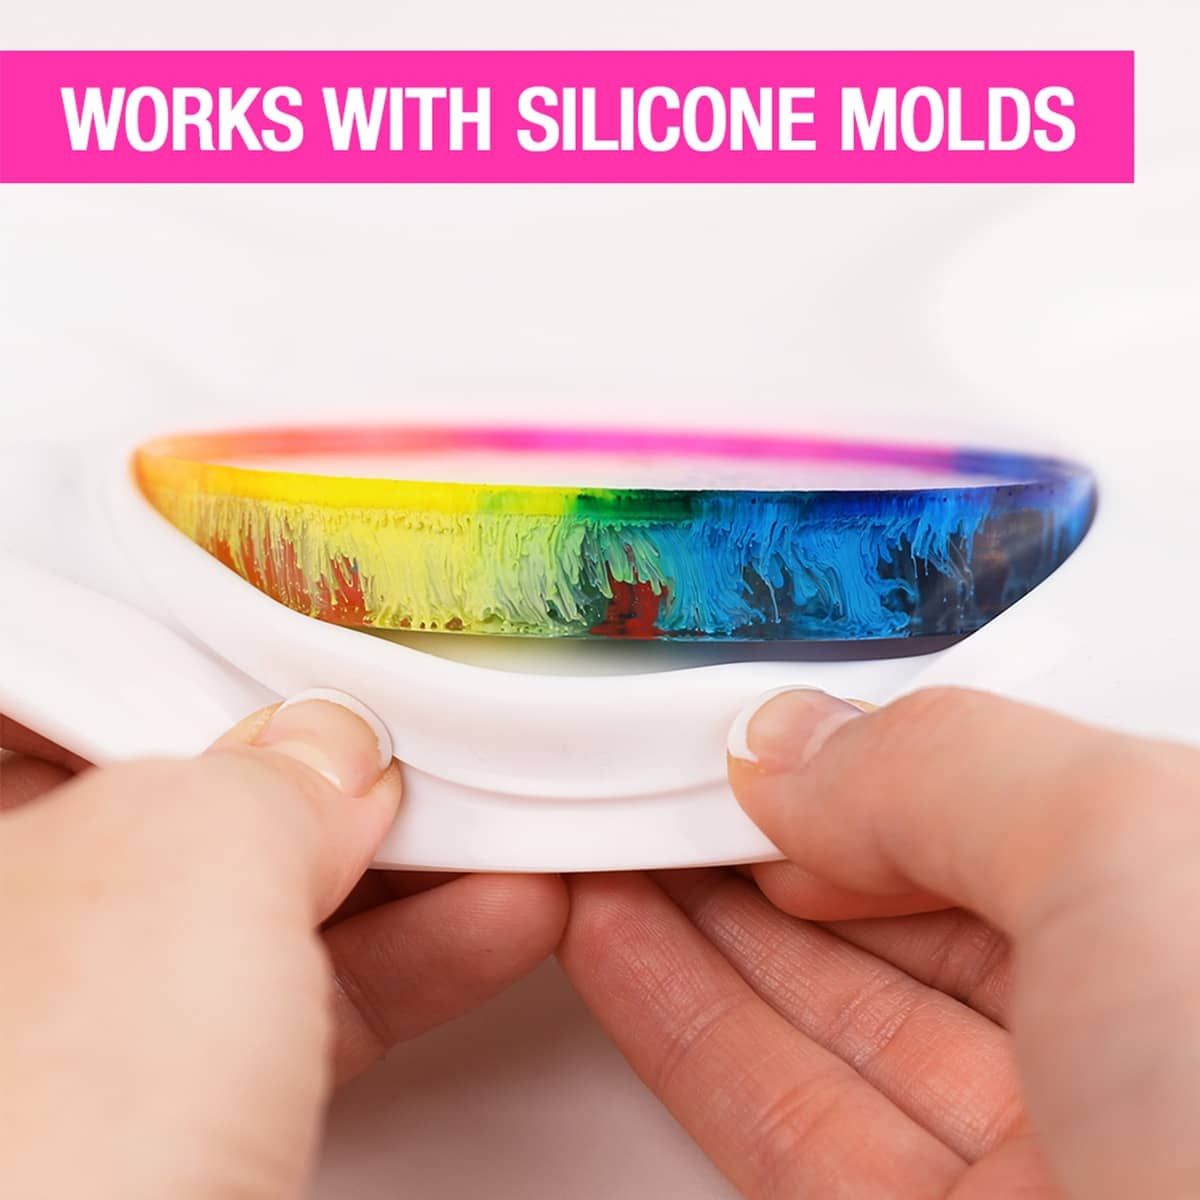 ArtResin works great with silicone molds